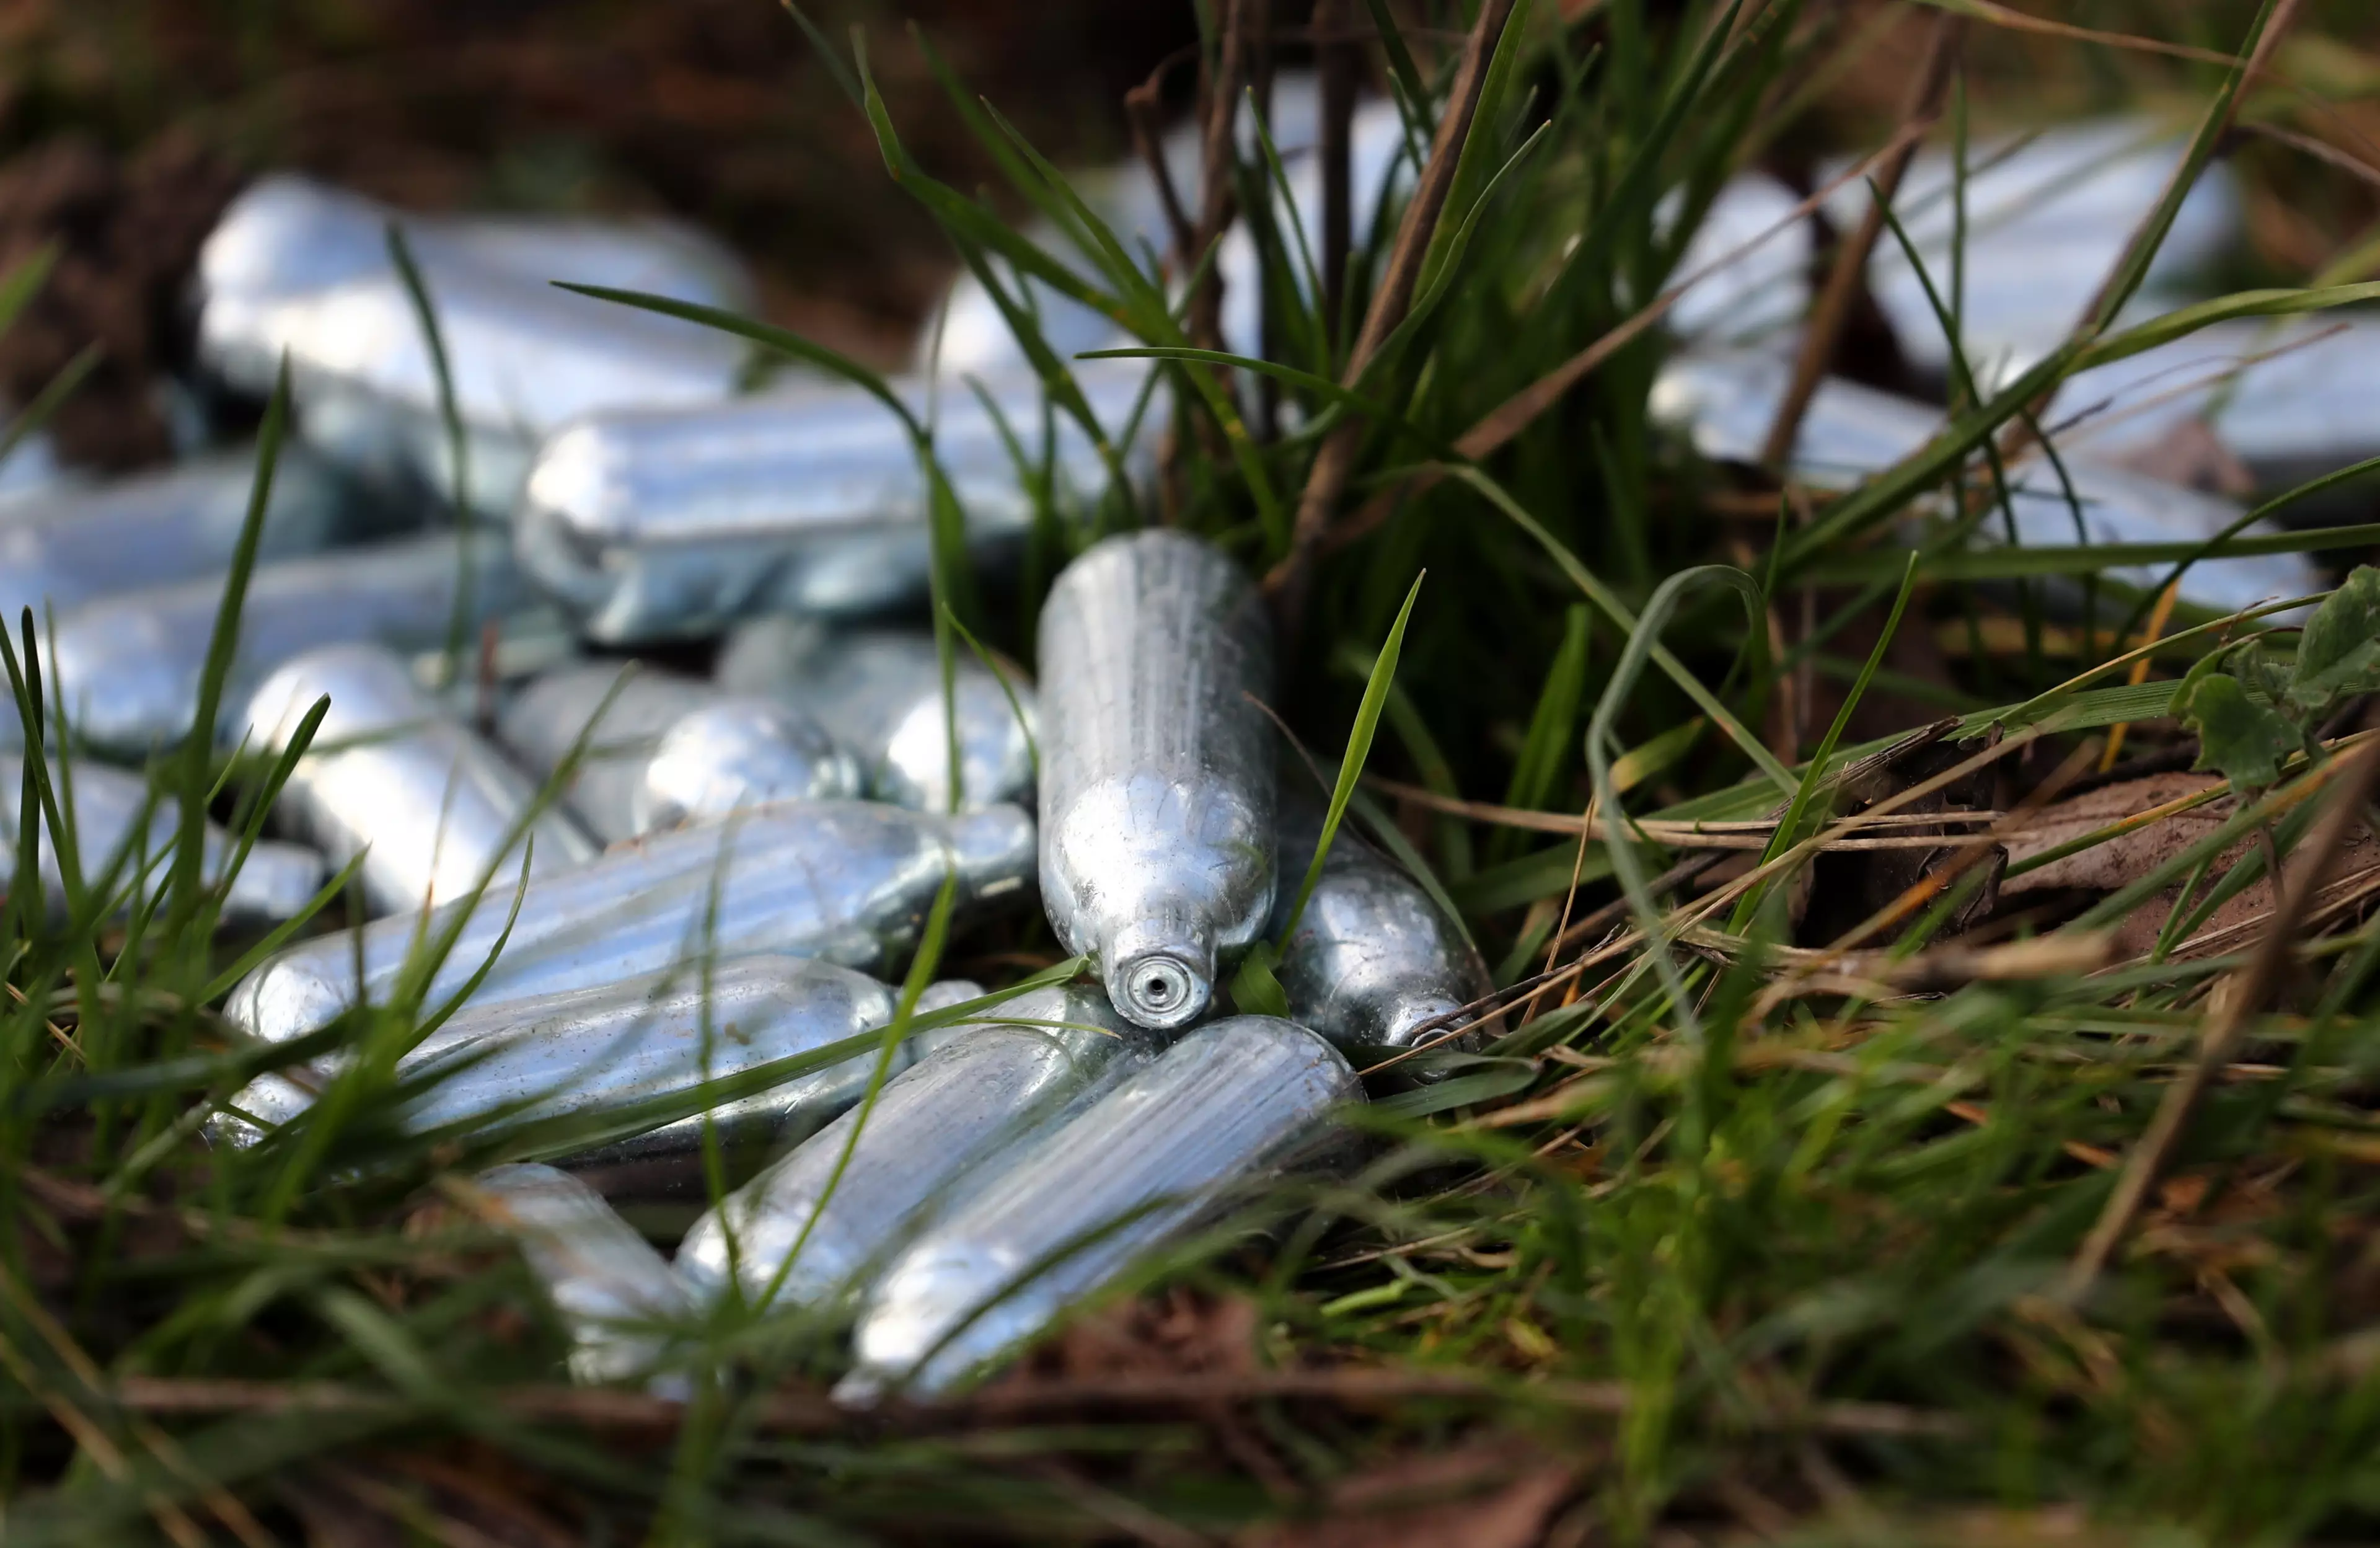 A woman has issued an urgent warning about the dangers of nitrous oxide.